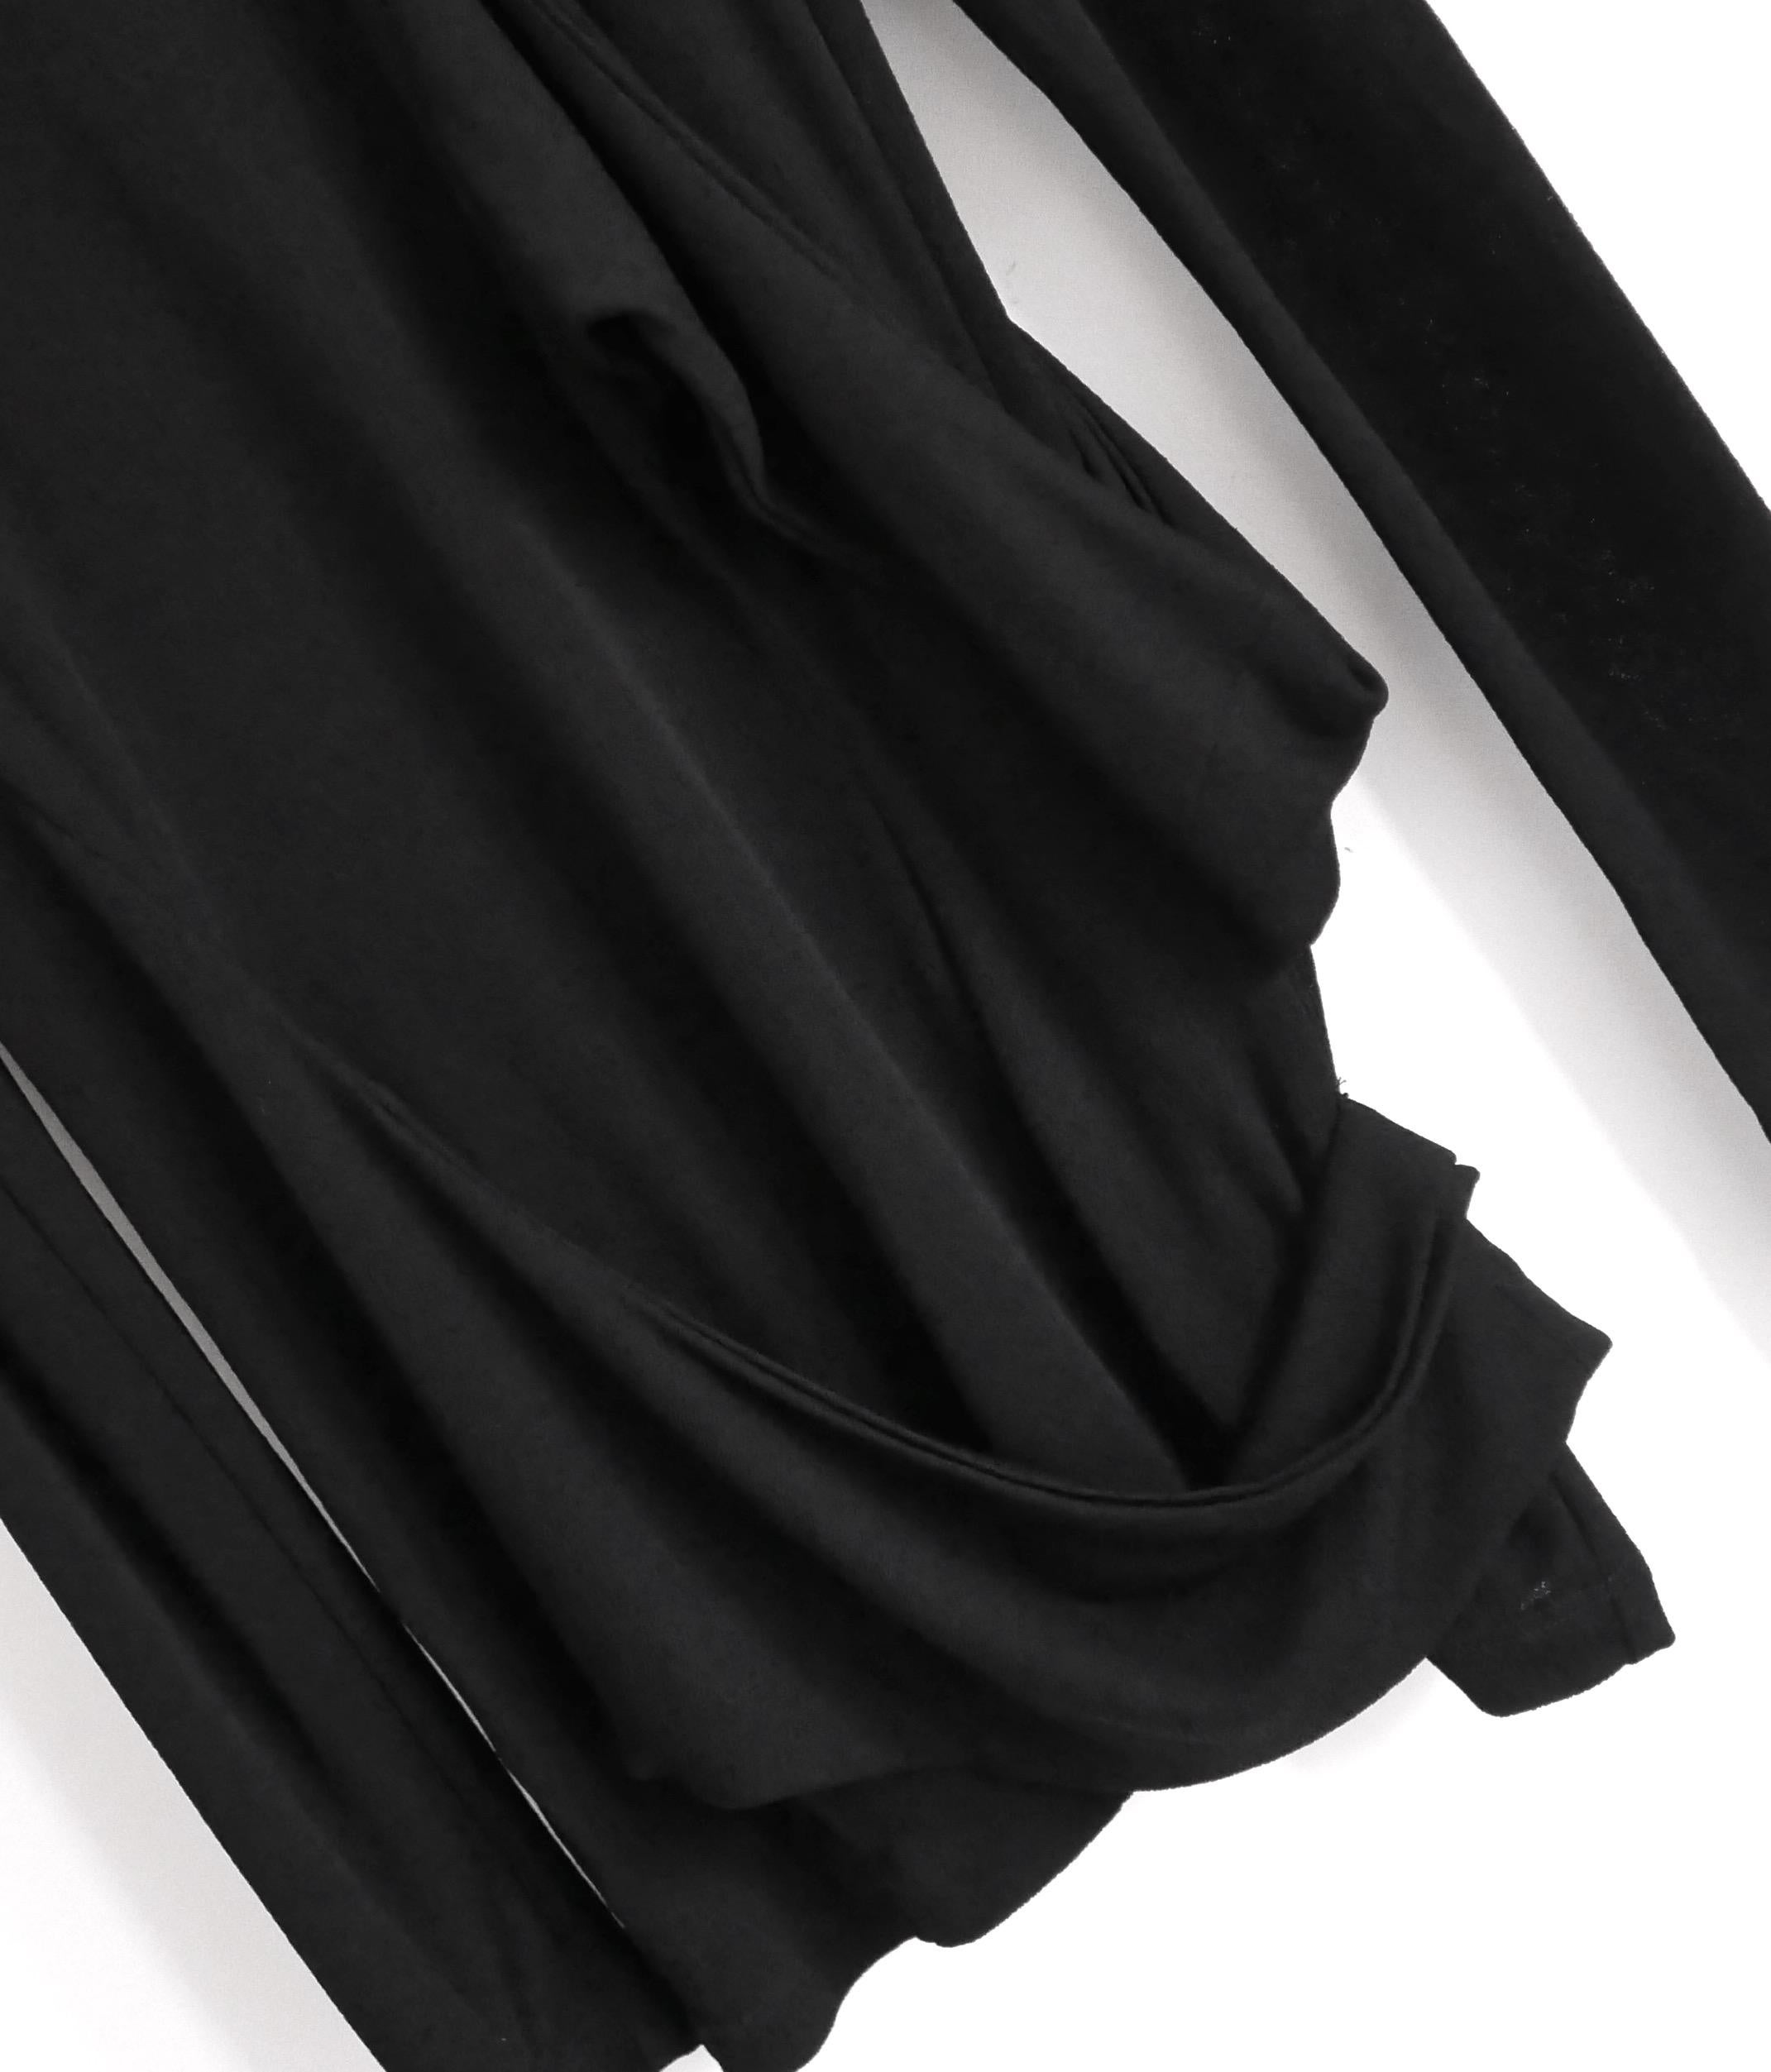 Edgy luxe Proenza Schouler draped long sleeve top. Bought for £895 and new with tag. Made from super stretchy black viscose crepe, it has a super complex cut with gorgeous architectural draping throughout. Has a form fitting cut with long sleeves